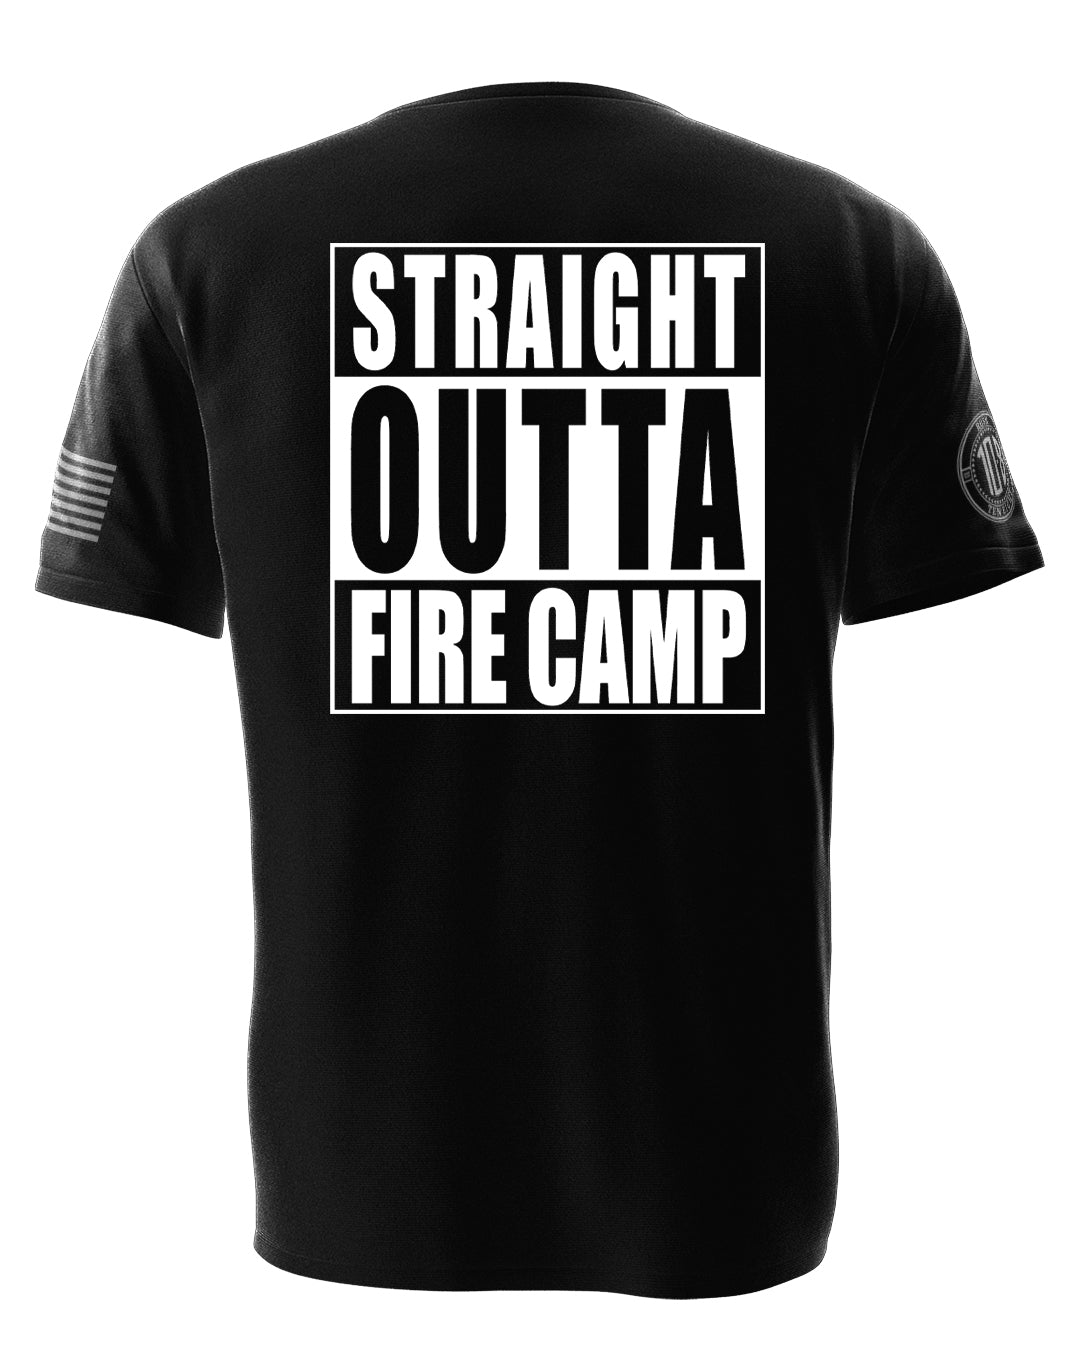 Straight Outta Fire Camp Men's Tee